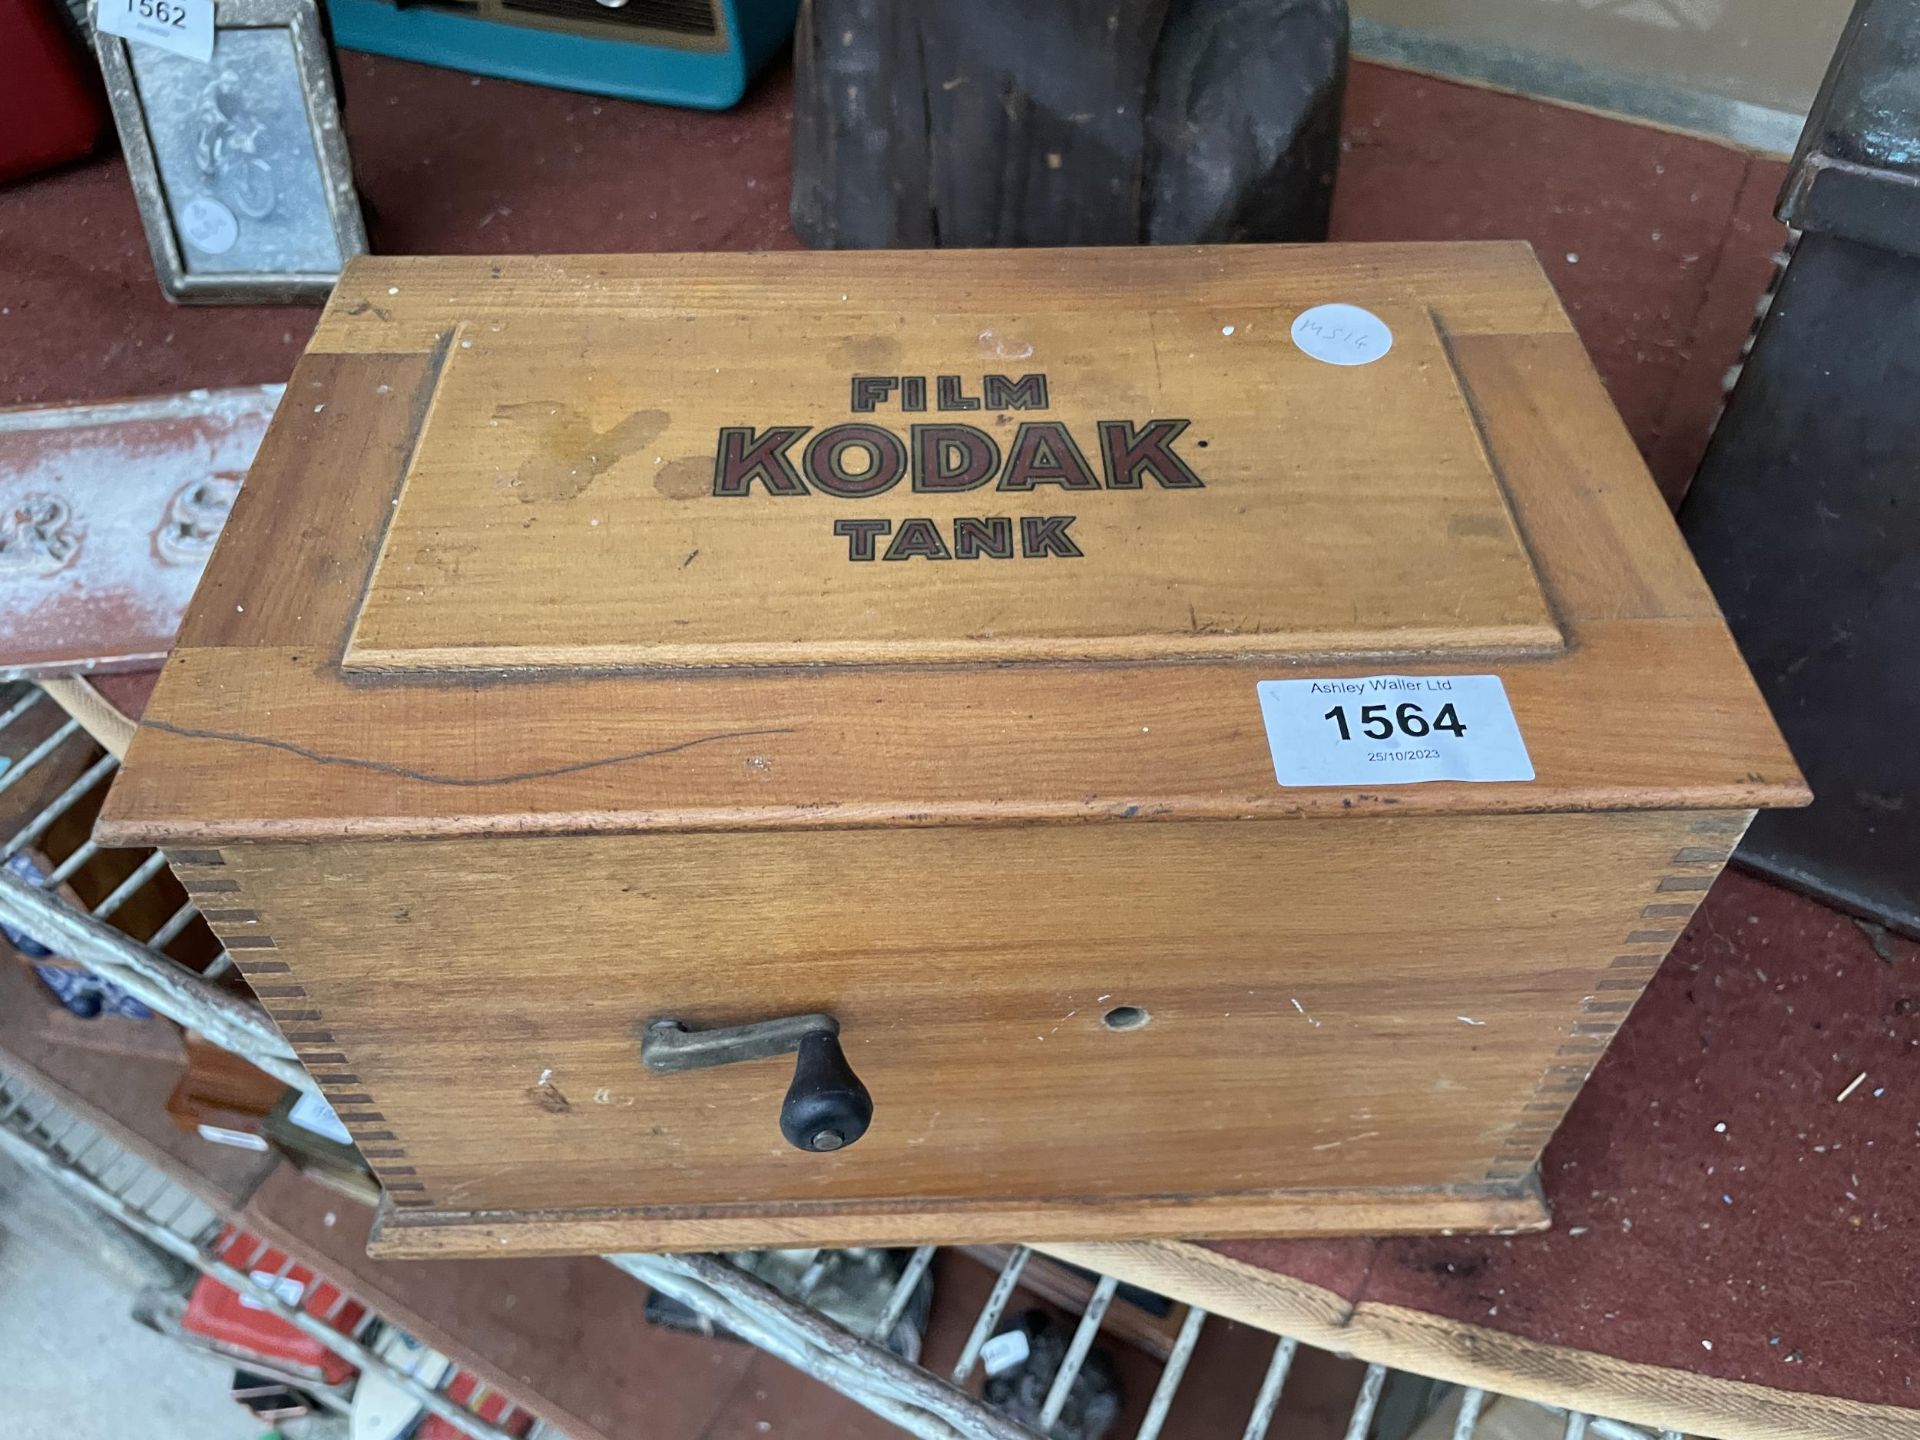 TWO METAL HOSPITAL BOXES AND A WOODEN KODAK FILM TANK - Image 3 of 6